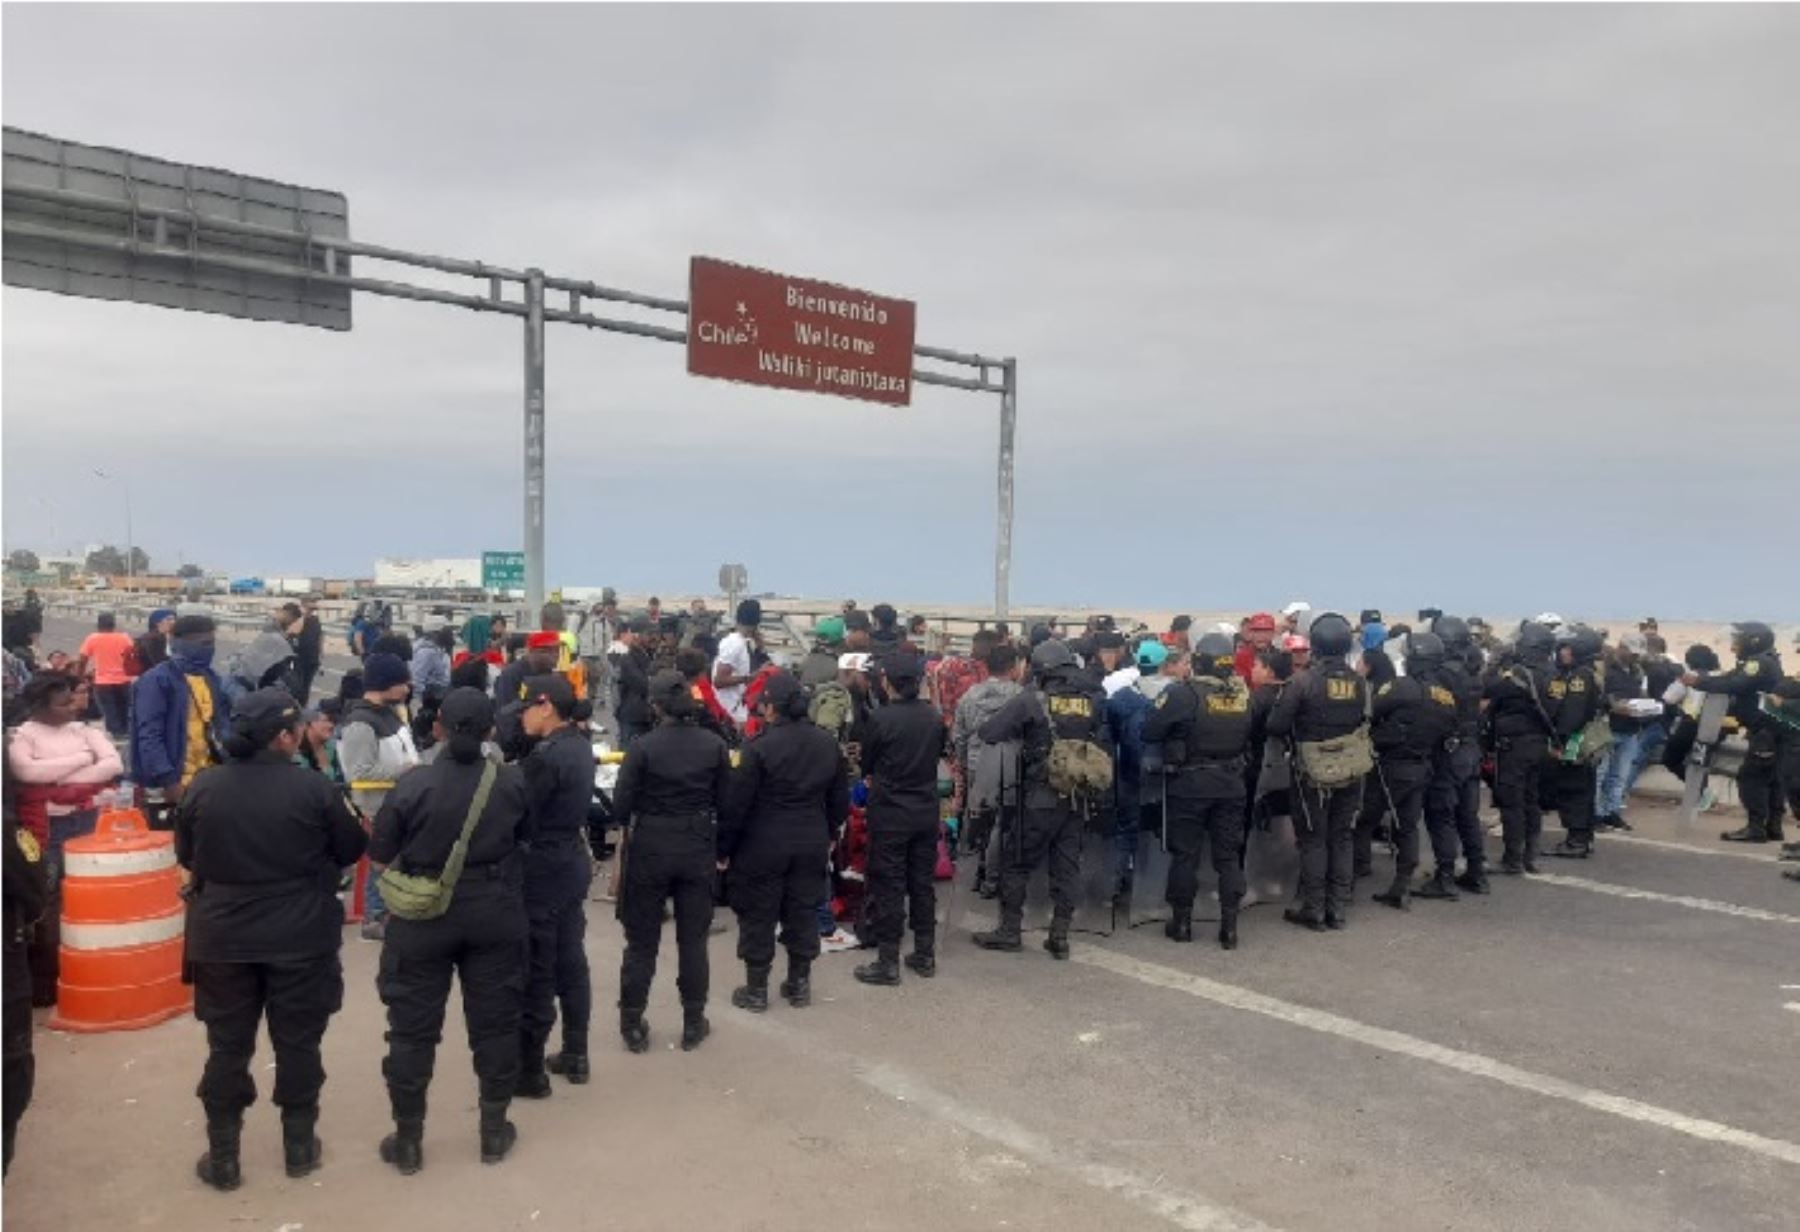 Serious disturbances between Peruvians and migrants on the border between Peru and Chile